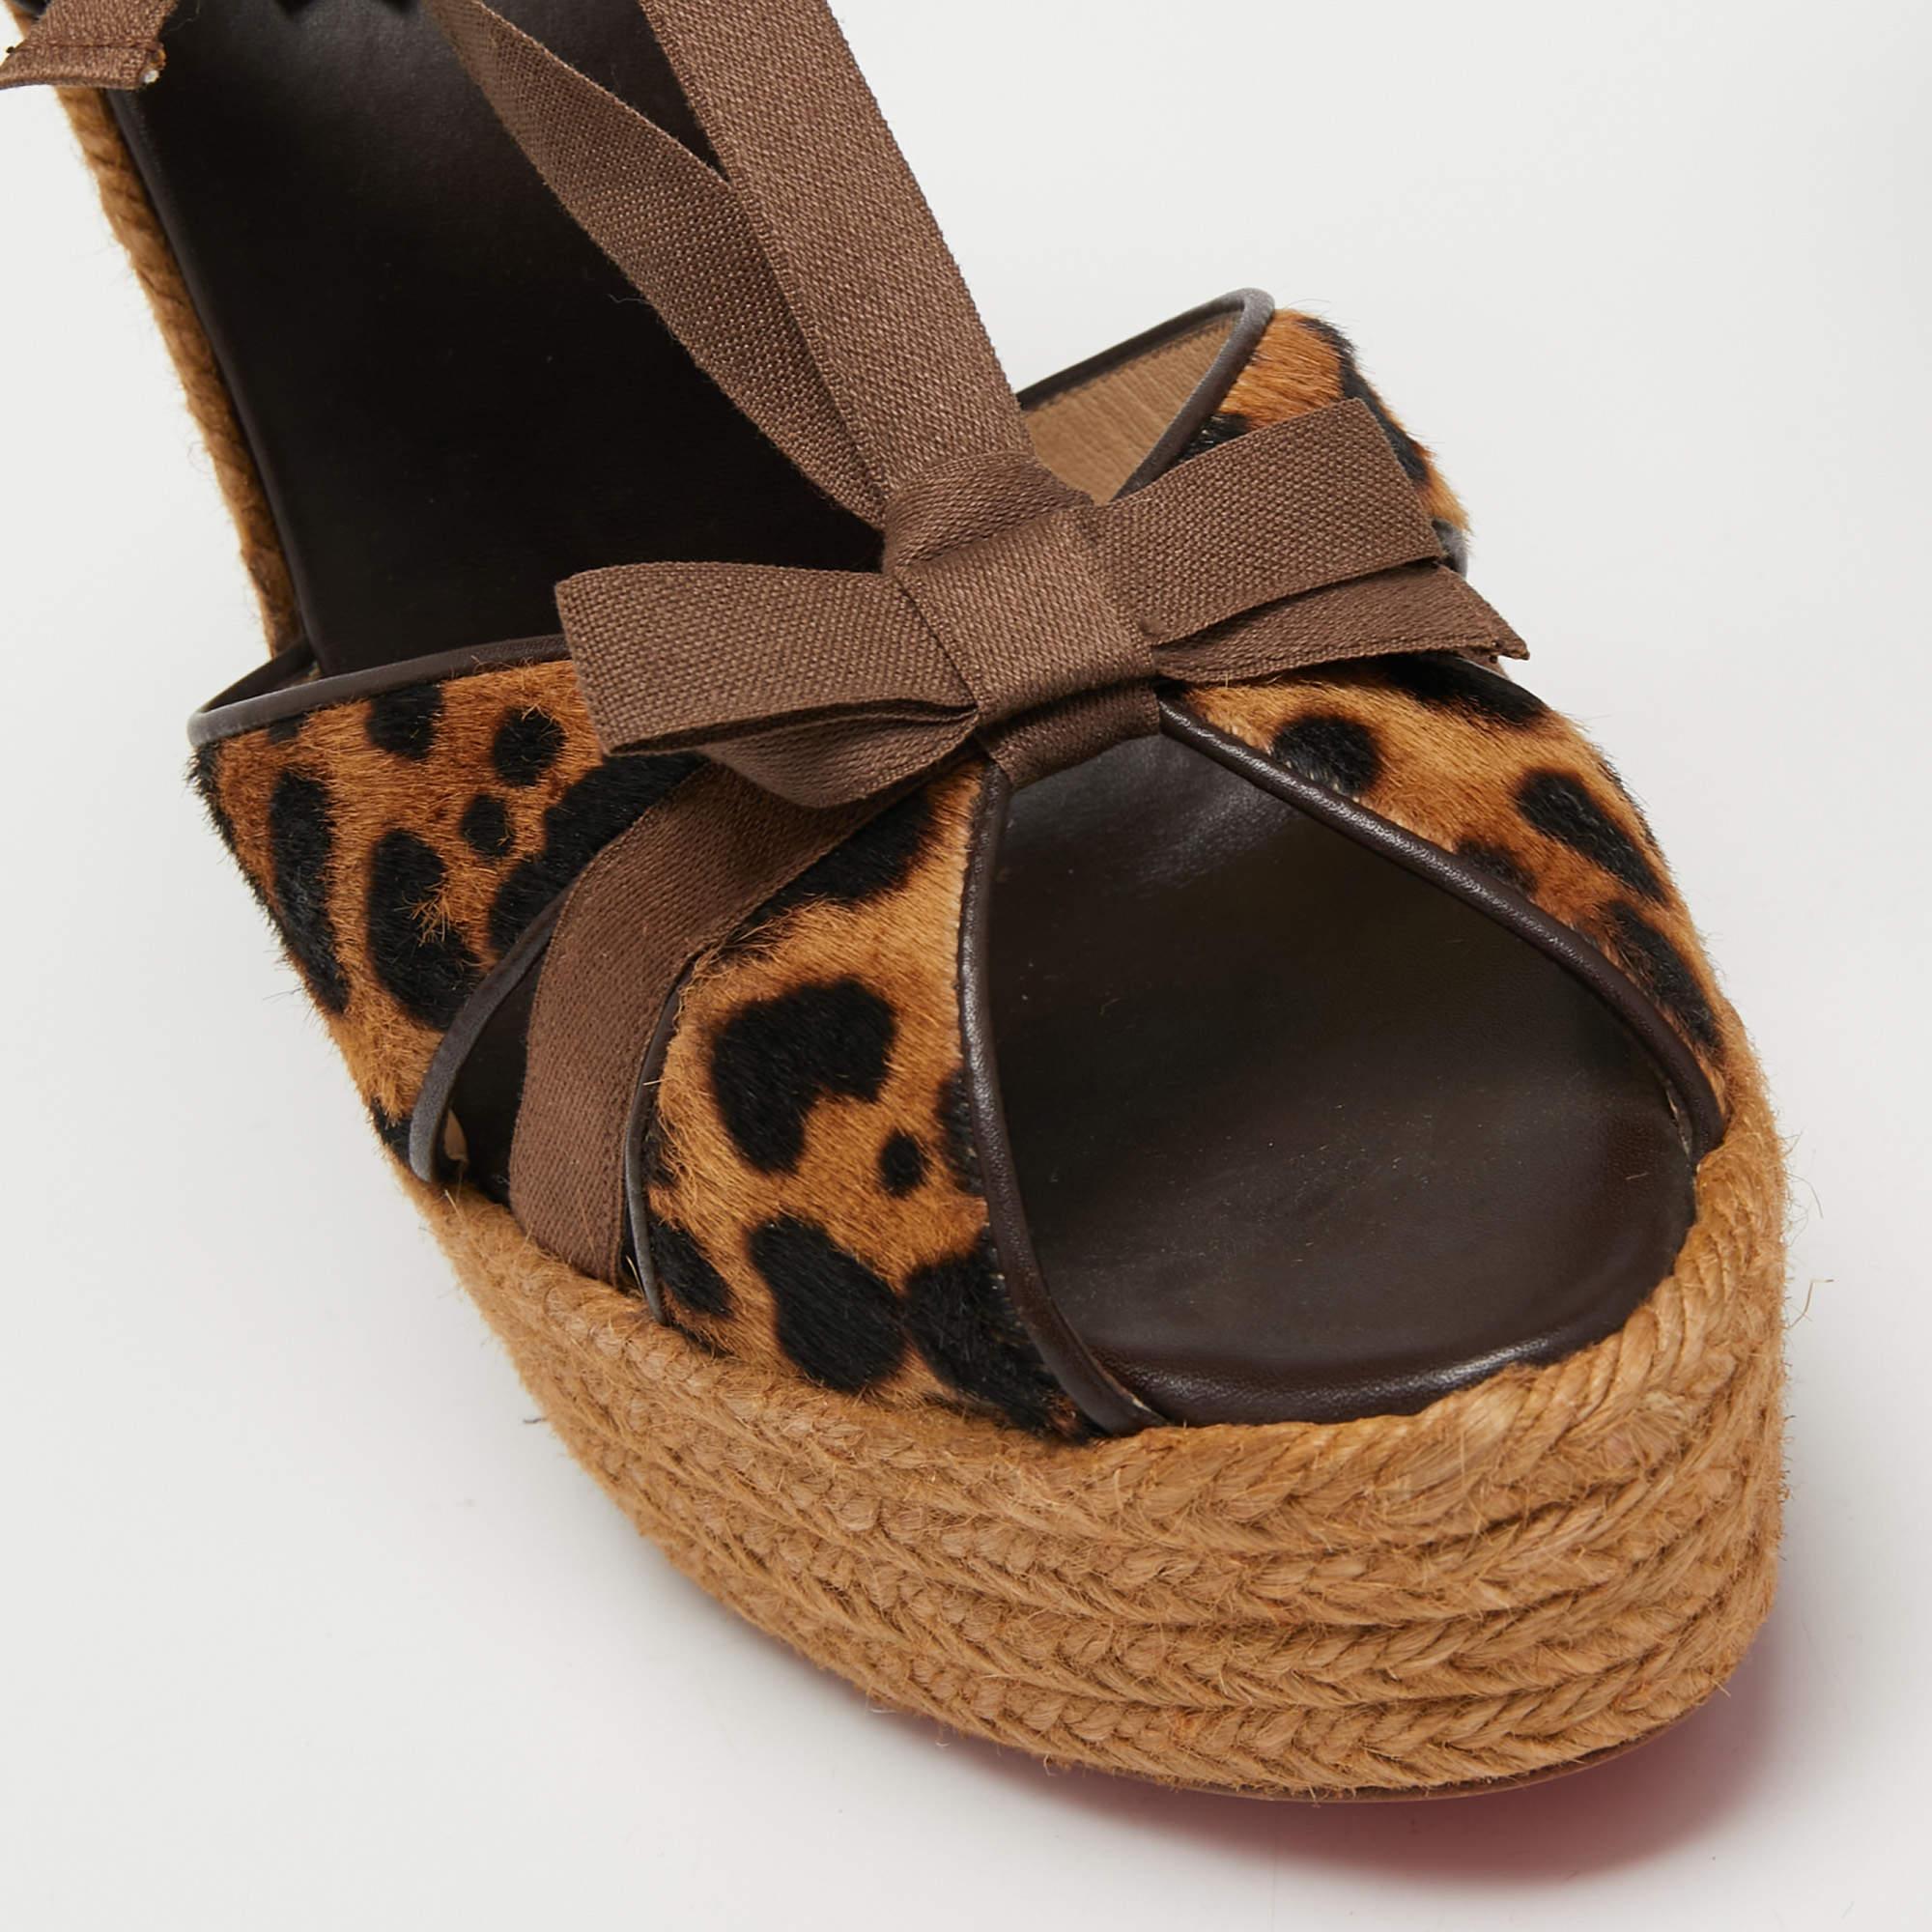 Christian Louboutin Brown/Black Calf Hair and Fabric Isabelle Wedge Size 41 3